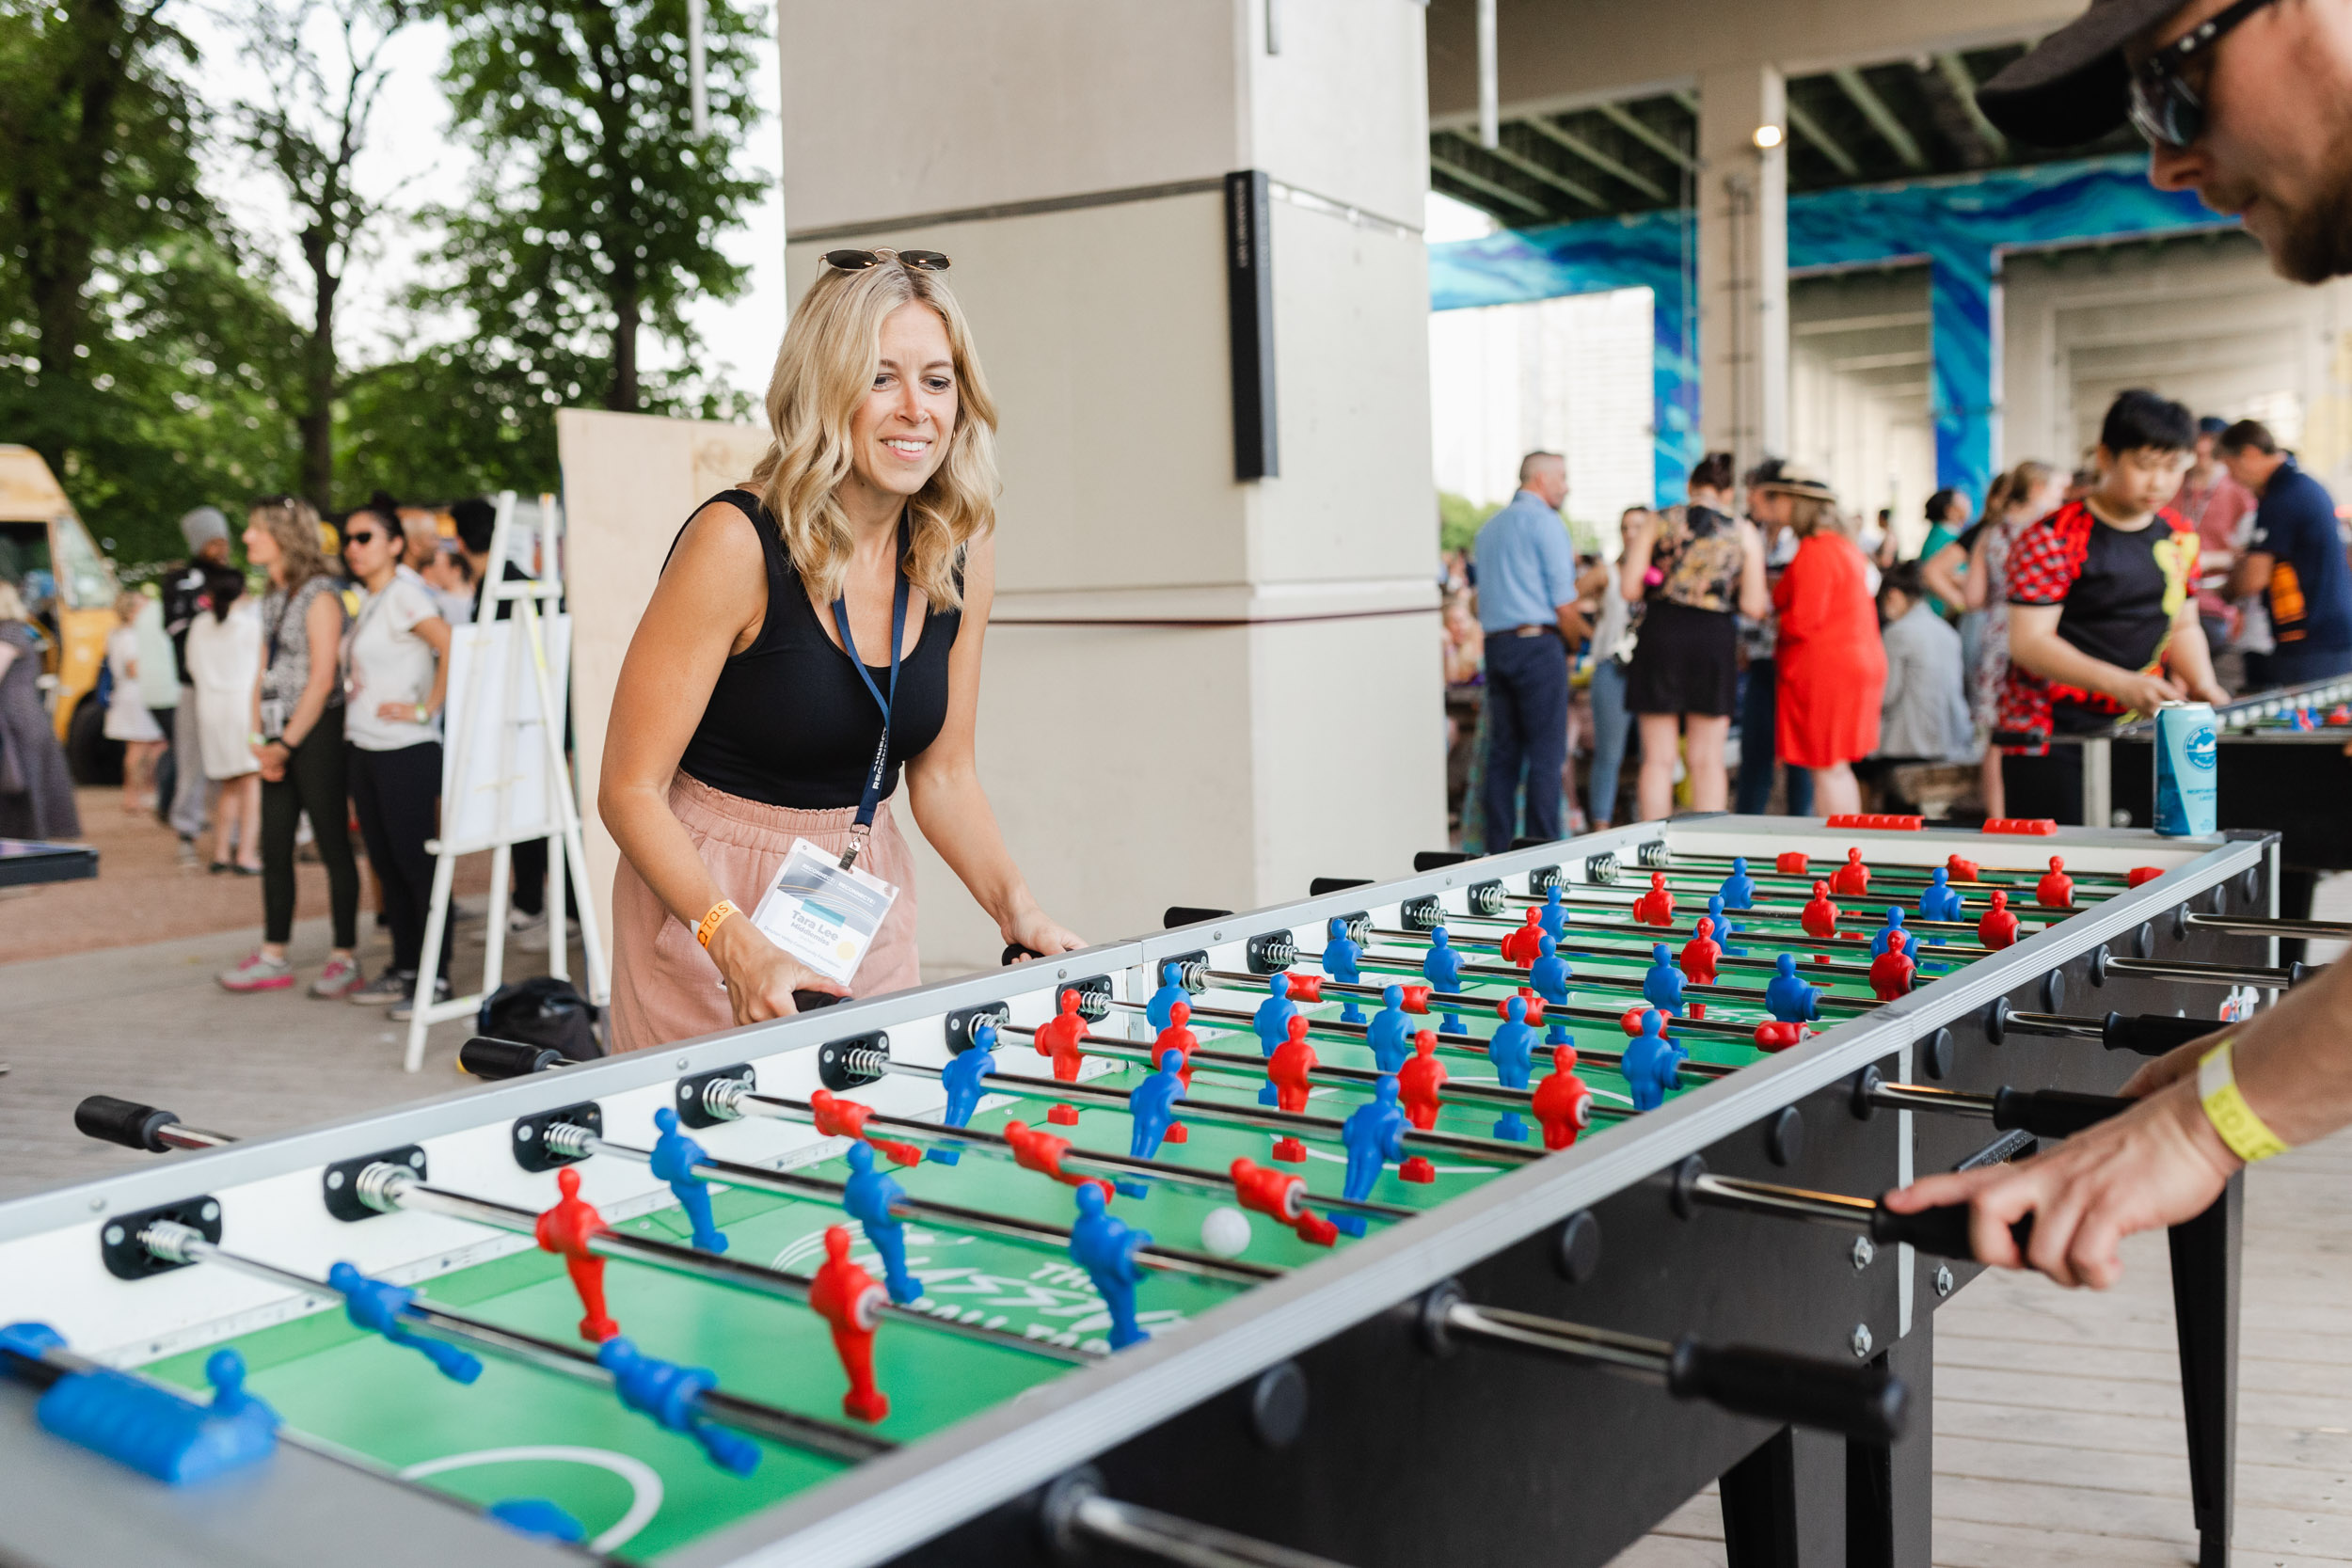 A group of people playing foosball at an outdoor conference event.